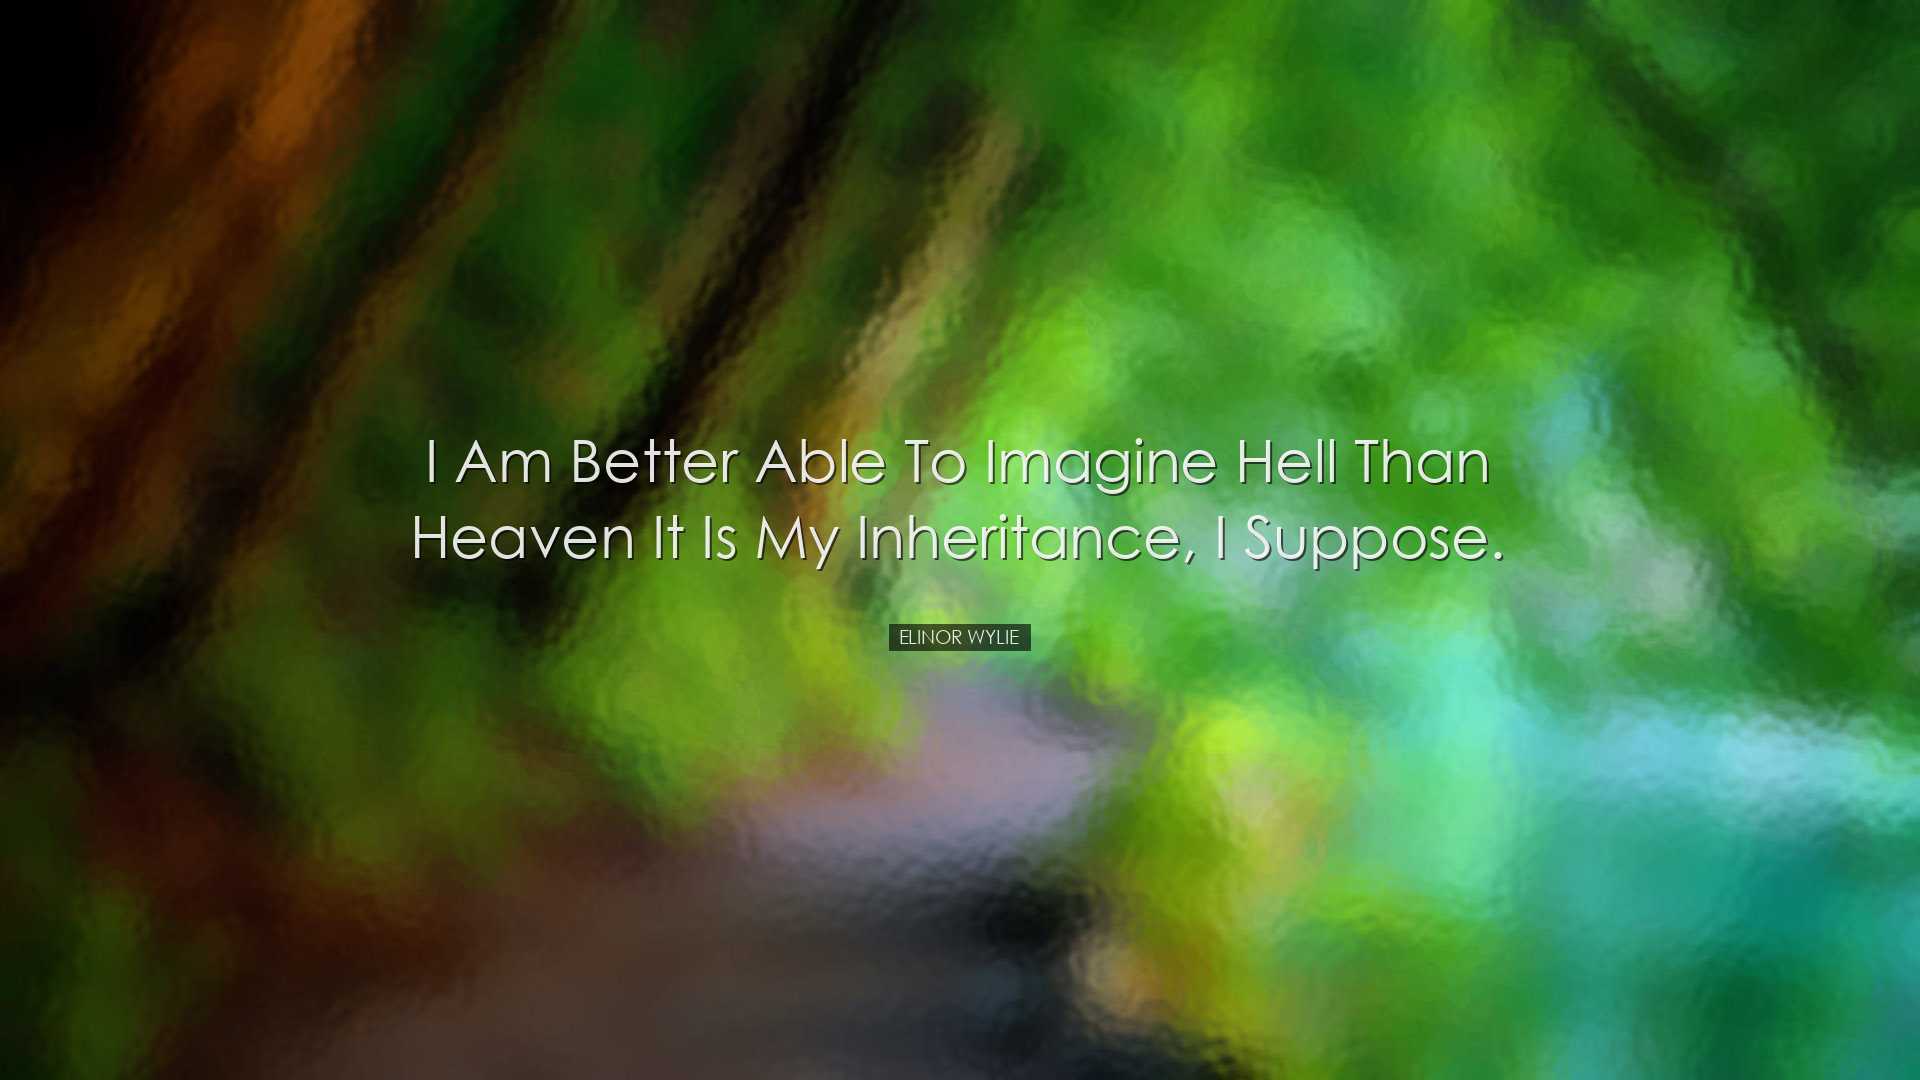 I am better able to imagine hell than heaven it is my inheritance,